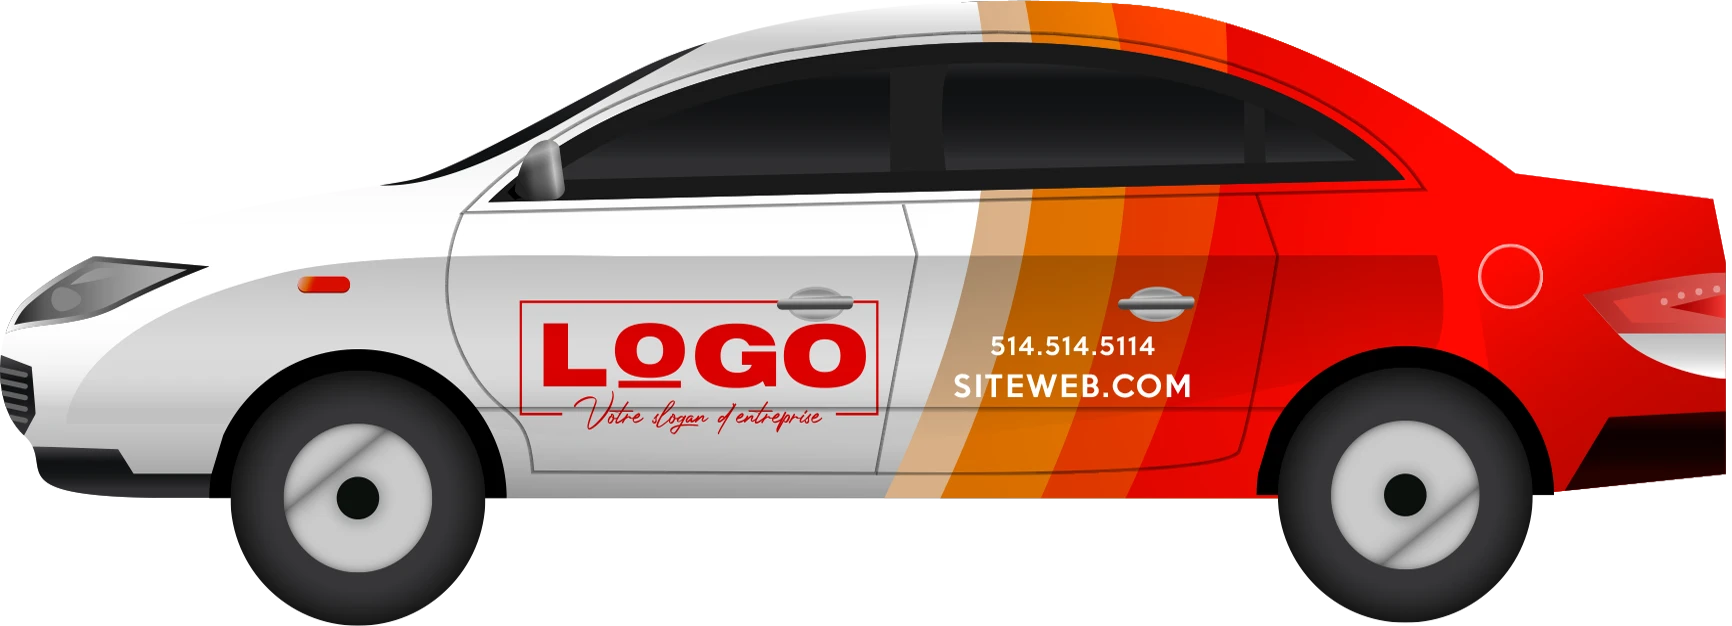 Graphic designer, partial wrapping installer on professional vehicle | Repentigny, Terrebonne